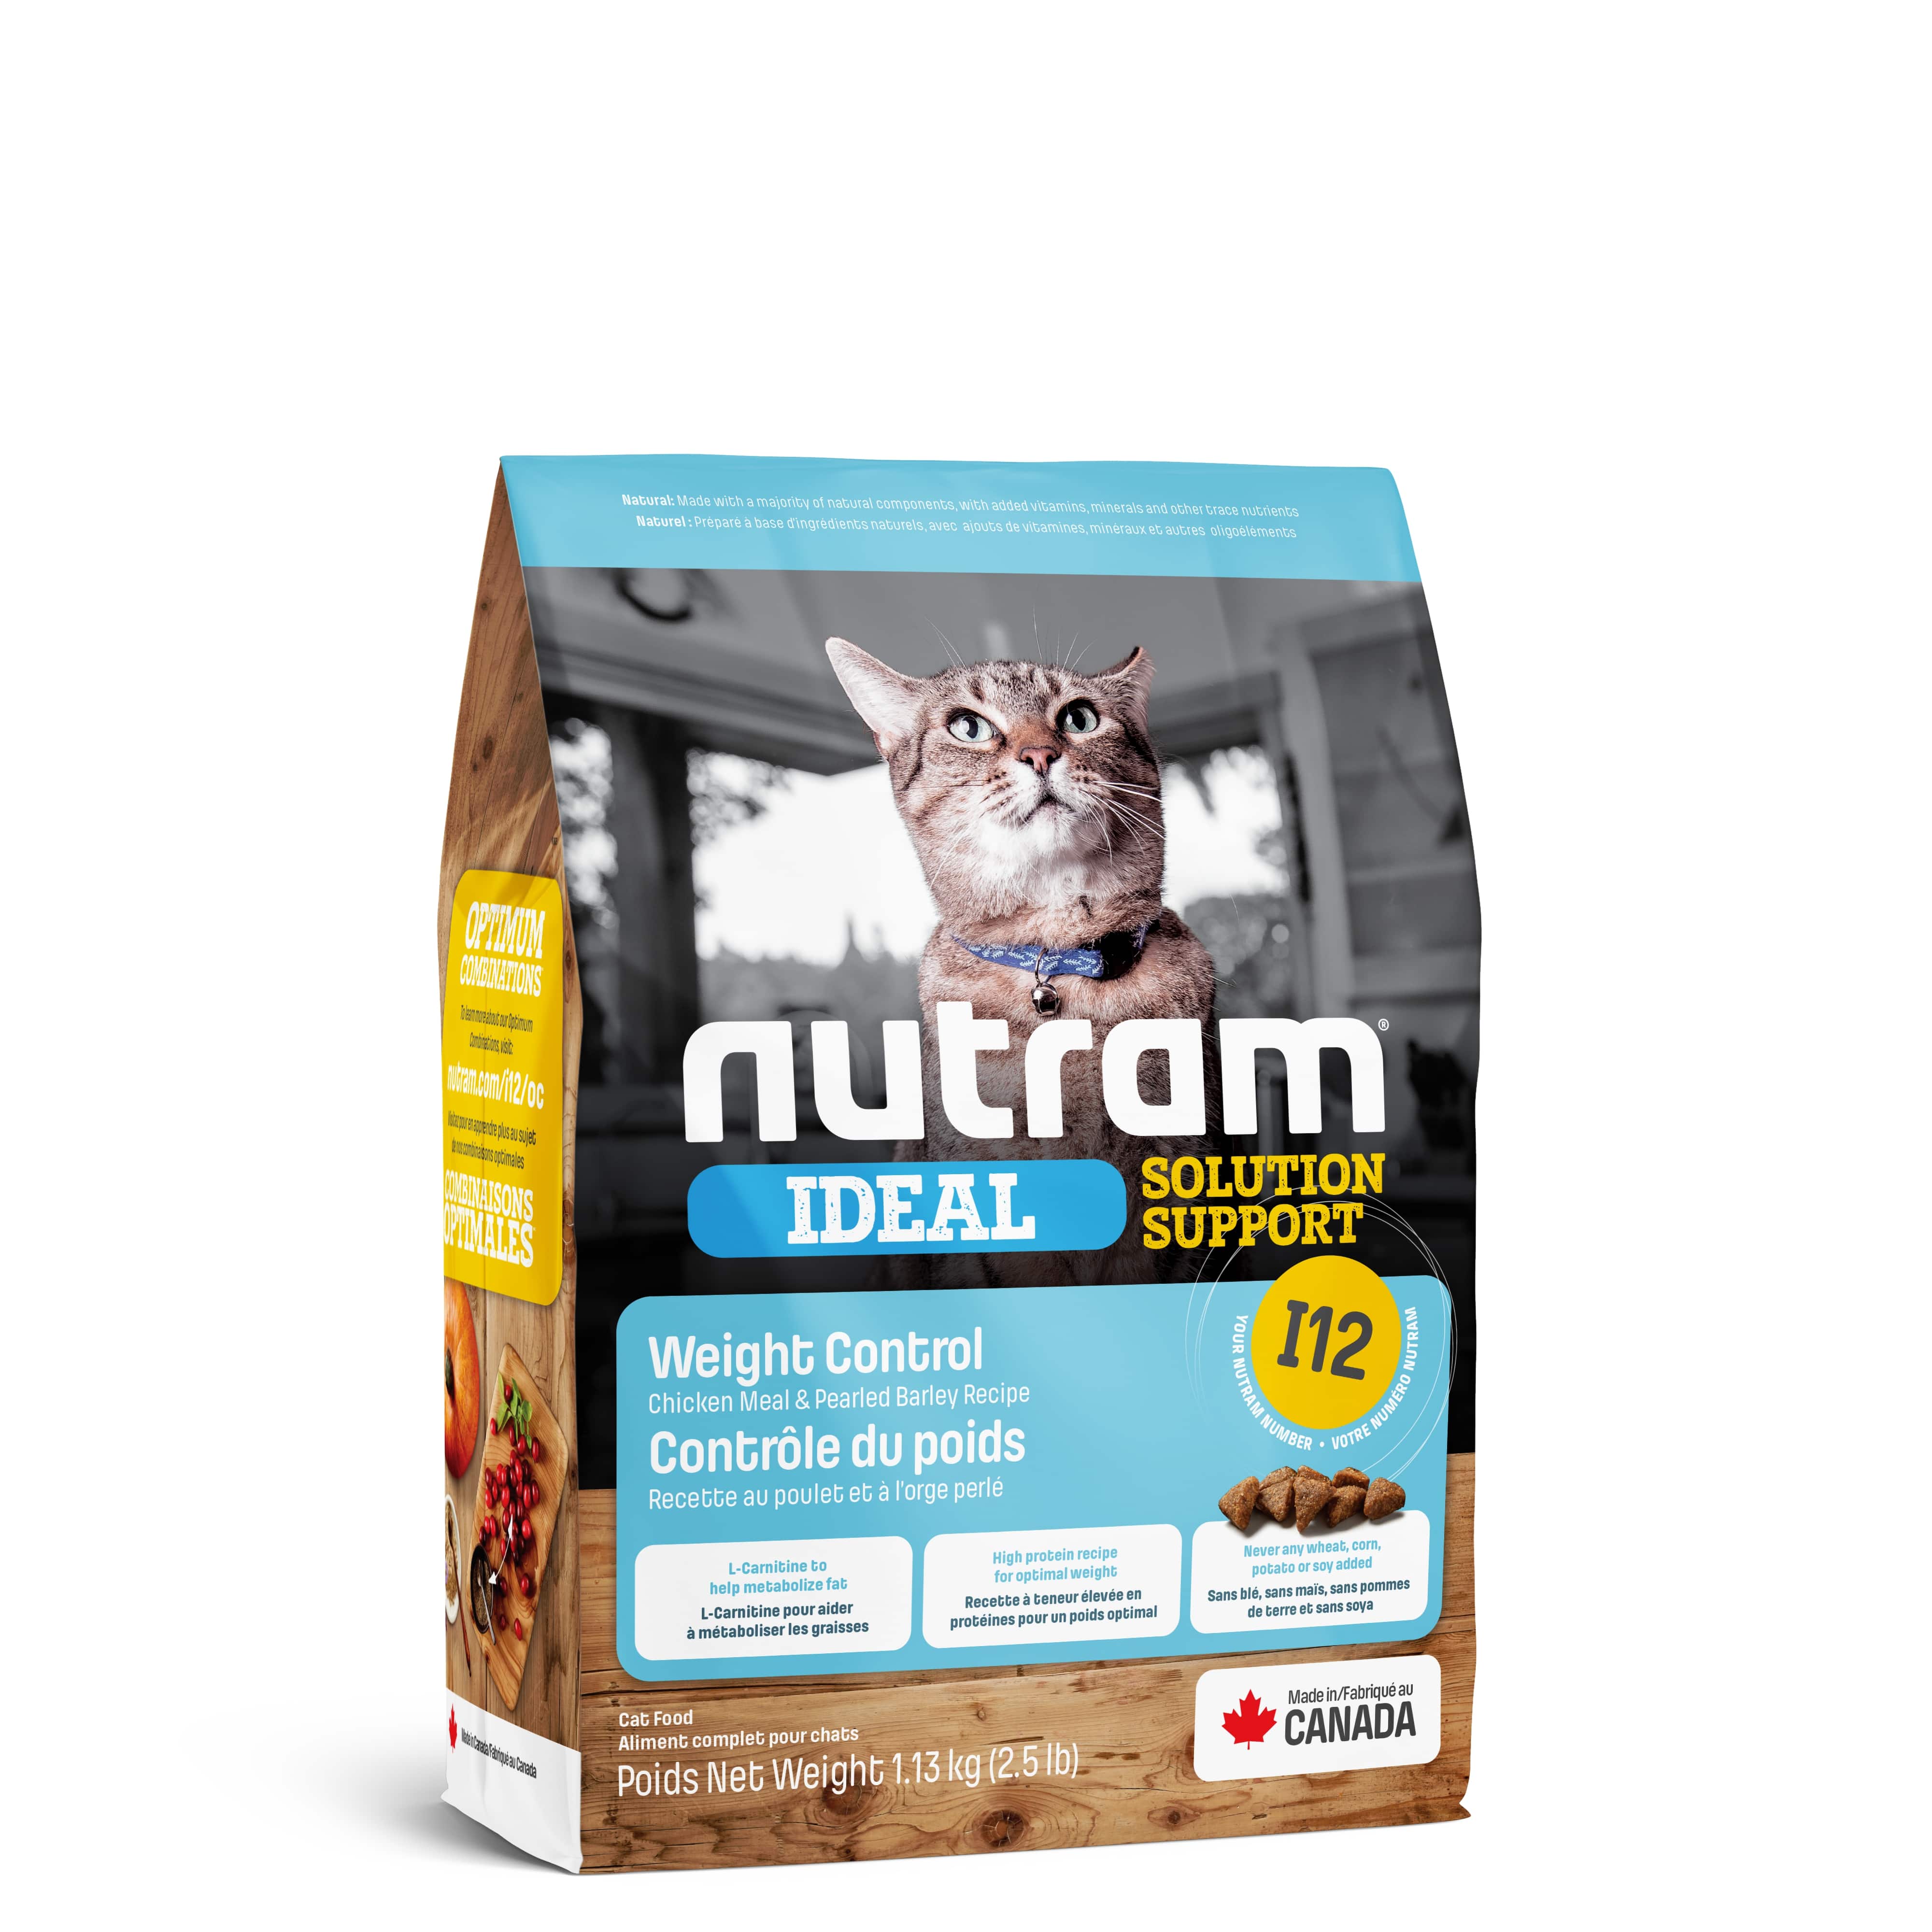 I12 Nutram Ideal Solution Support® Weight Control Cat Food